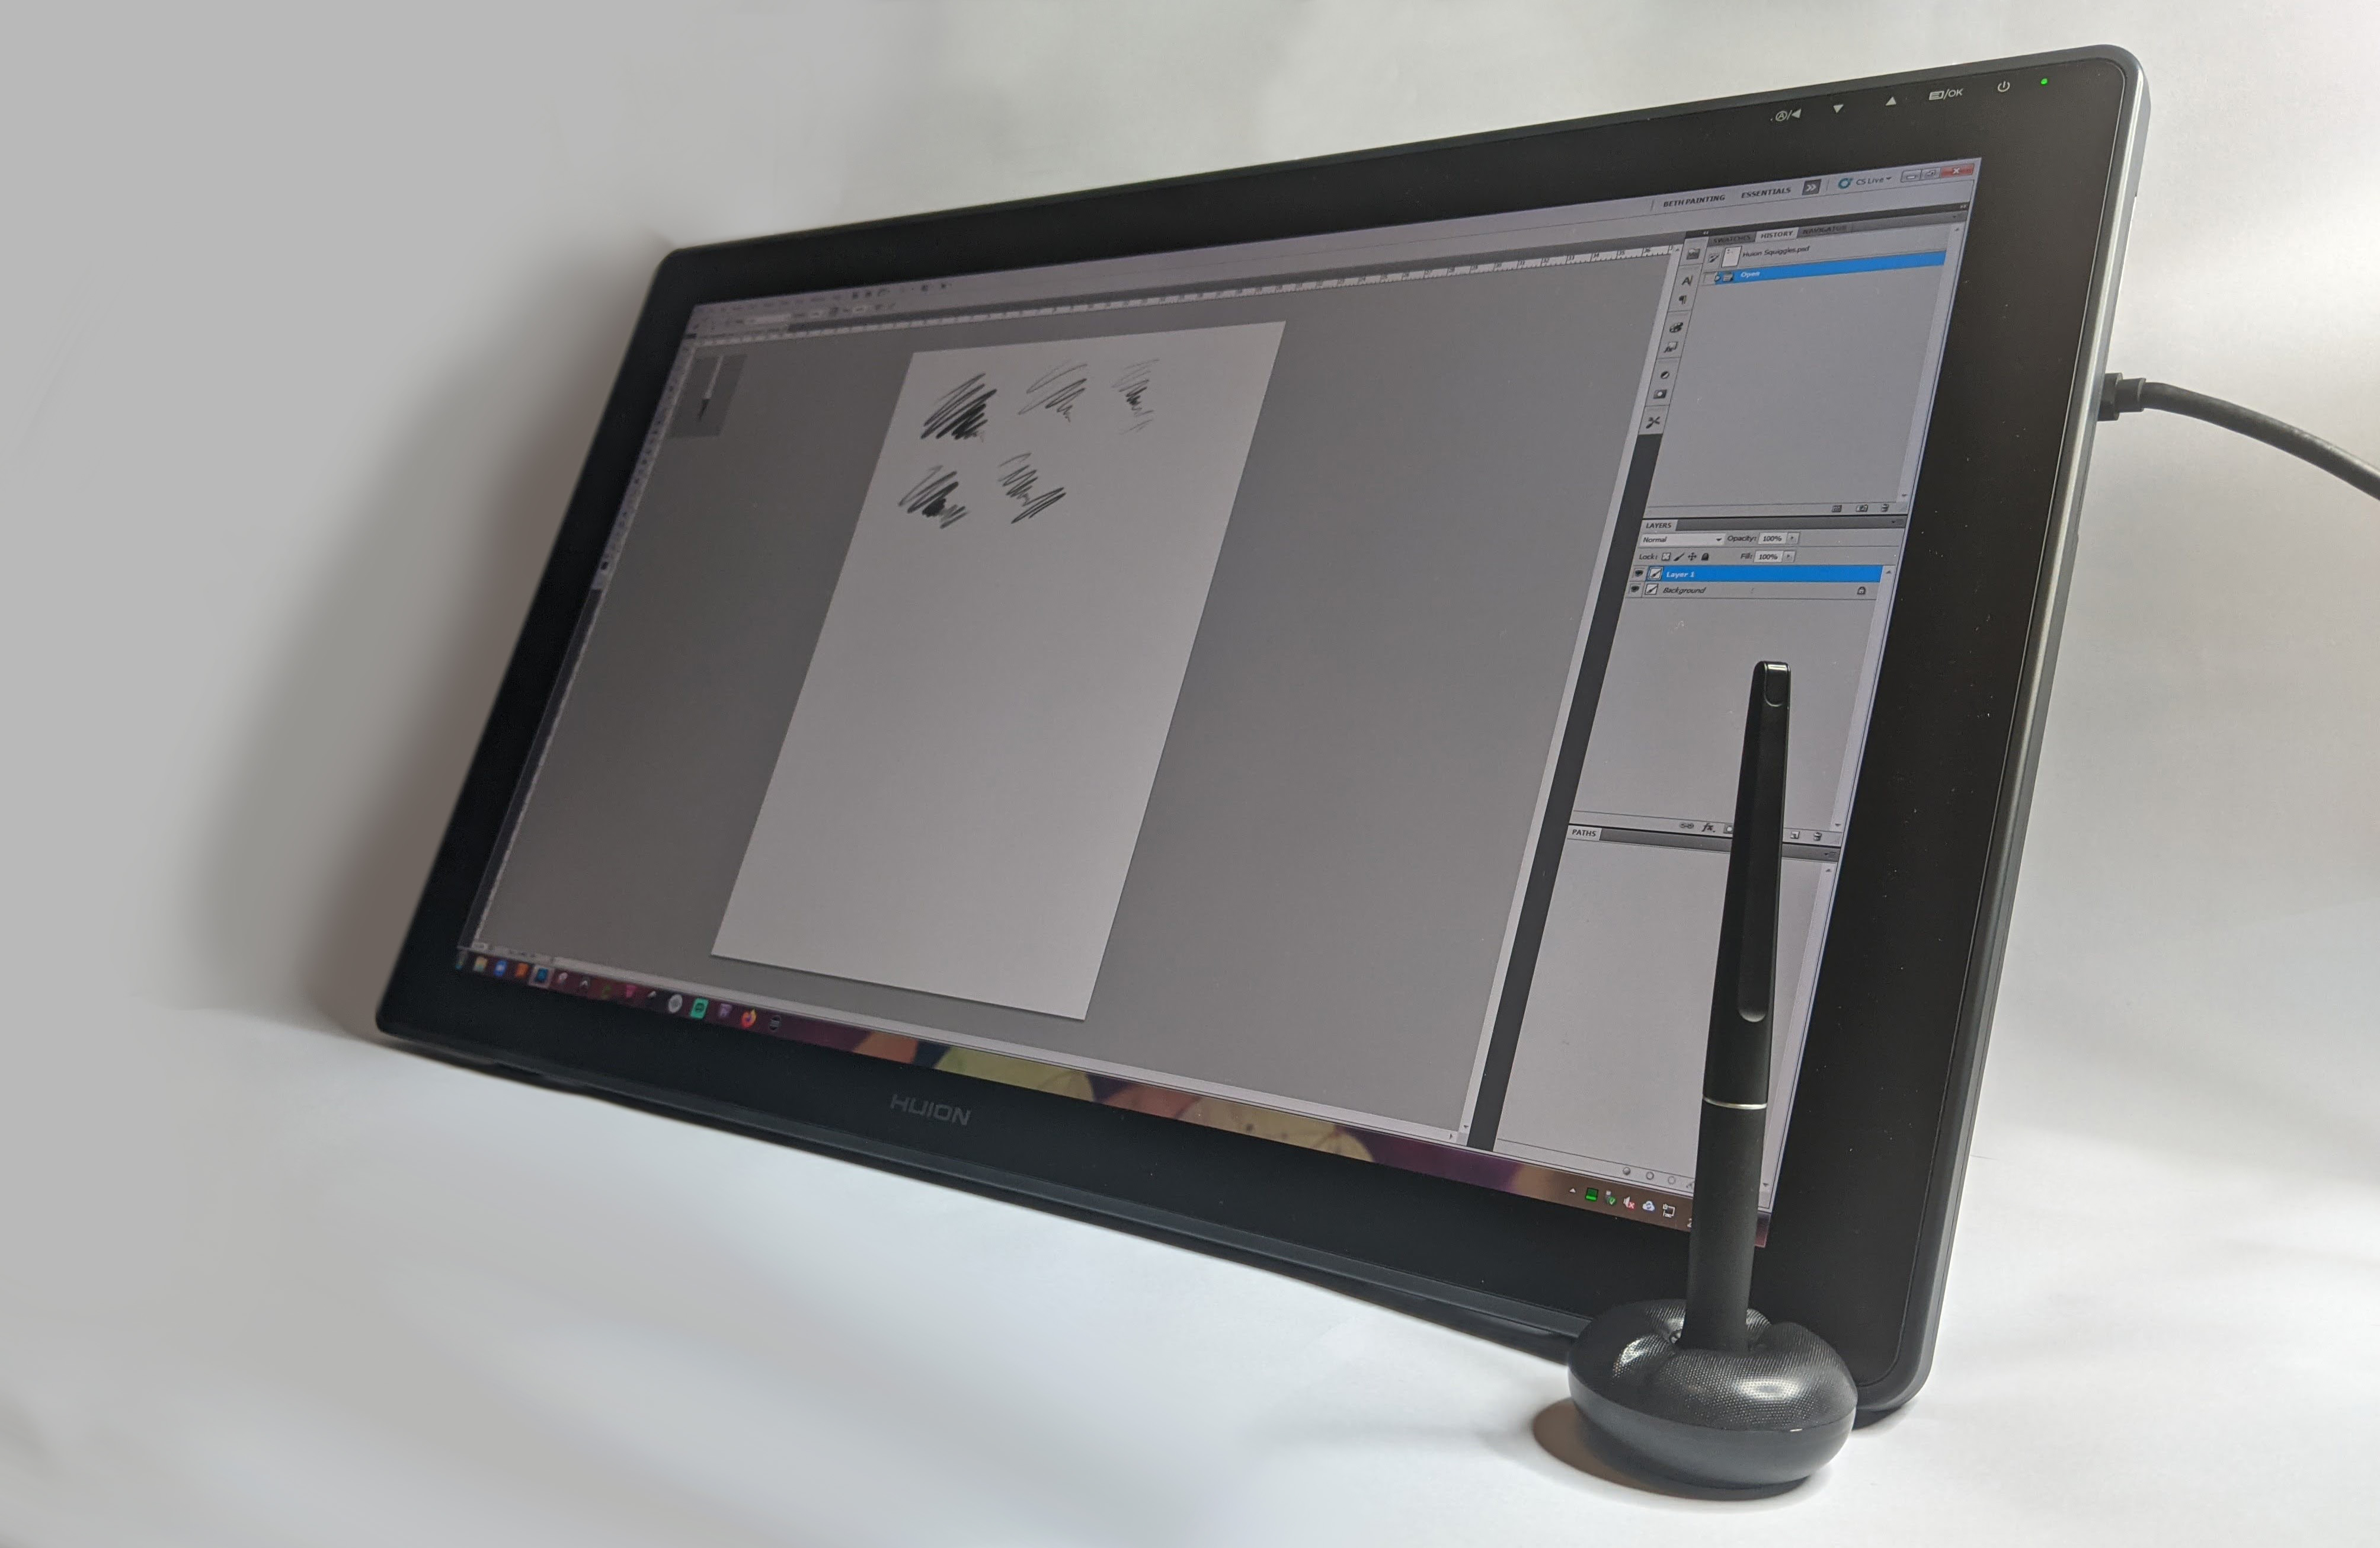 The best tablets with a stylus pen, a Huion Kamvas 24 Series on a white background displaying Photoshop